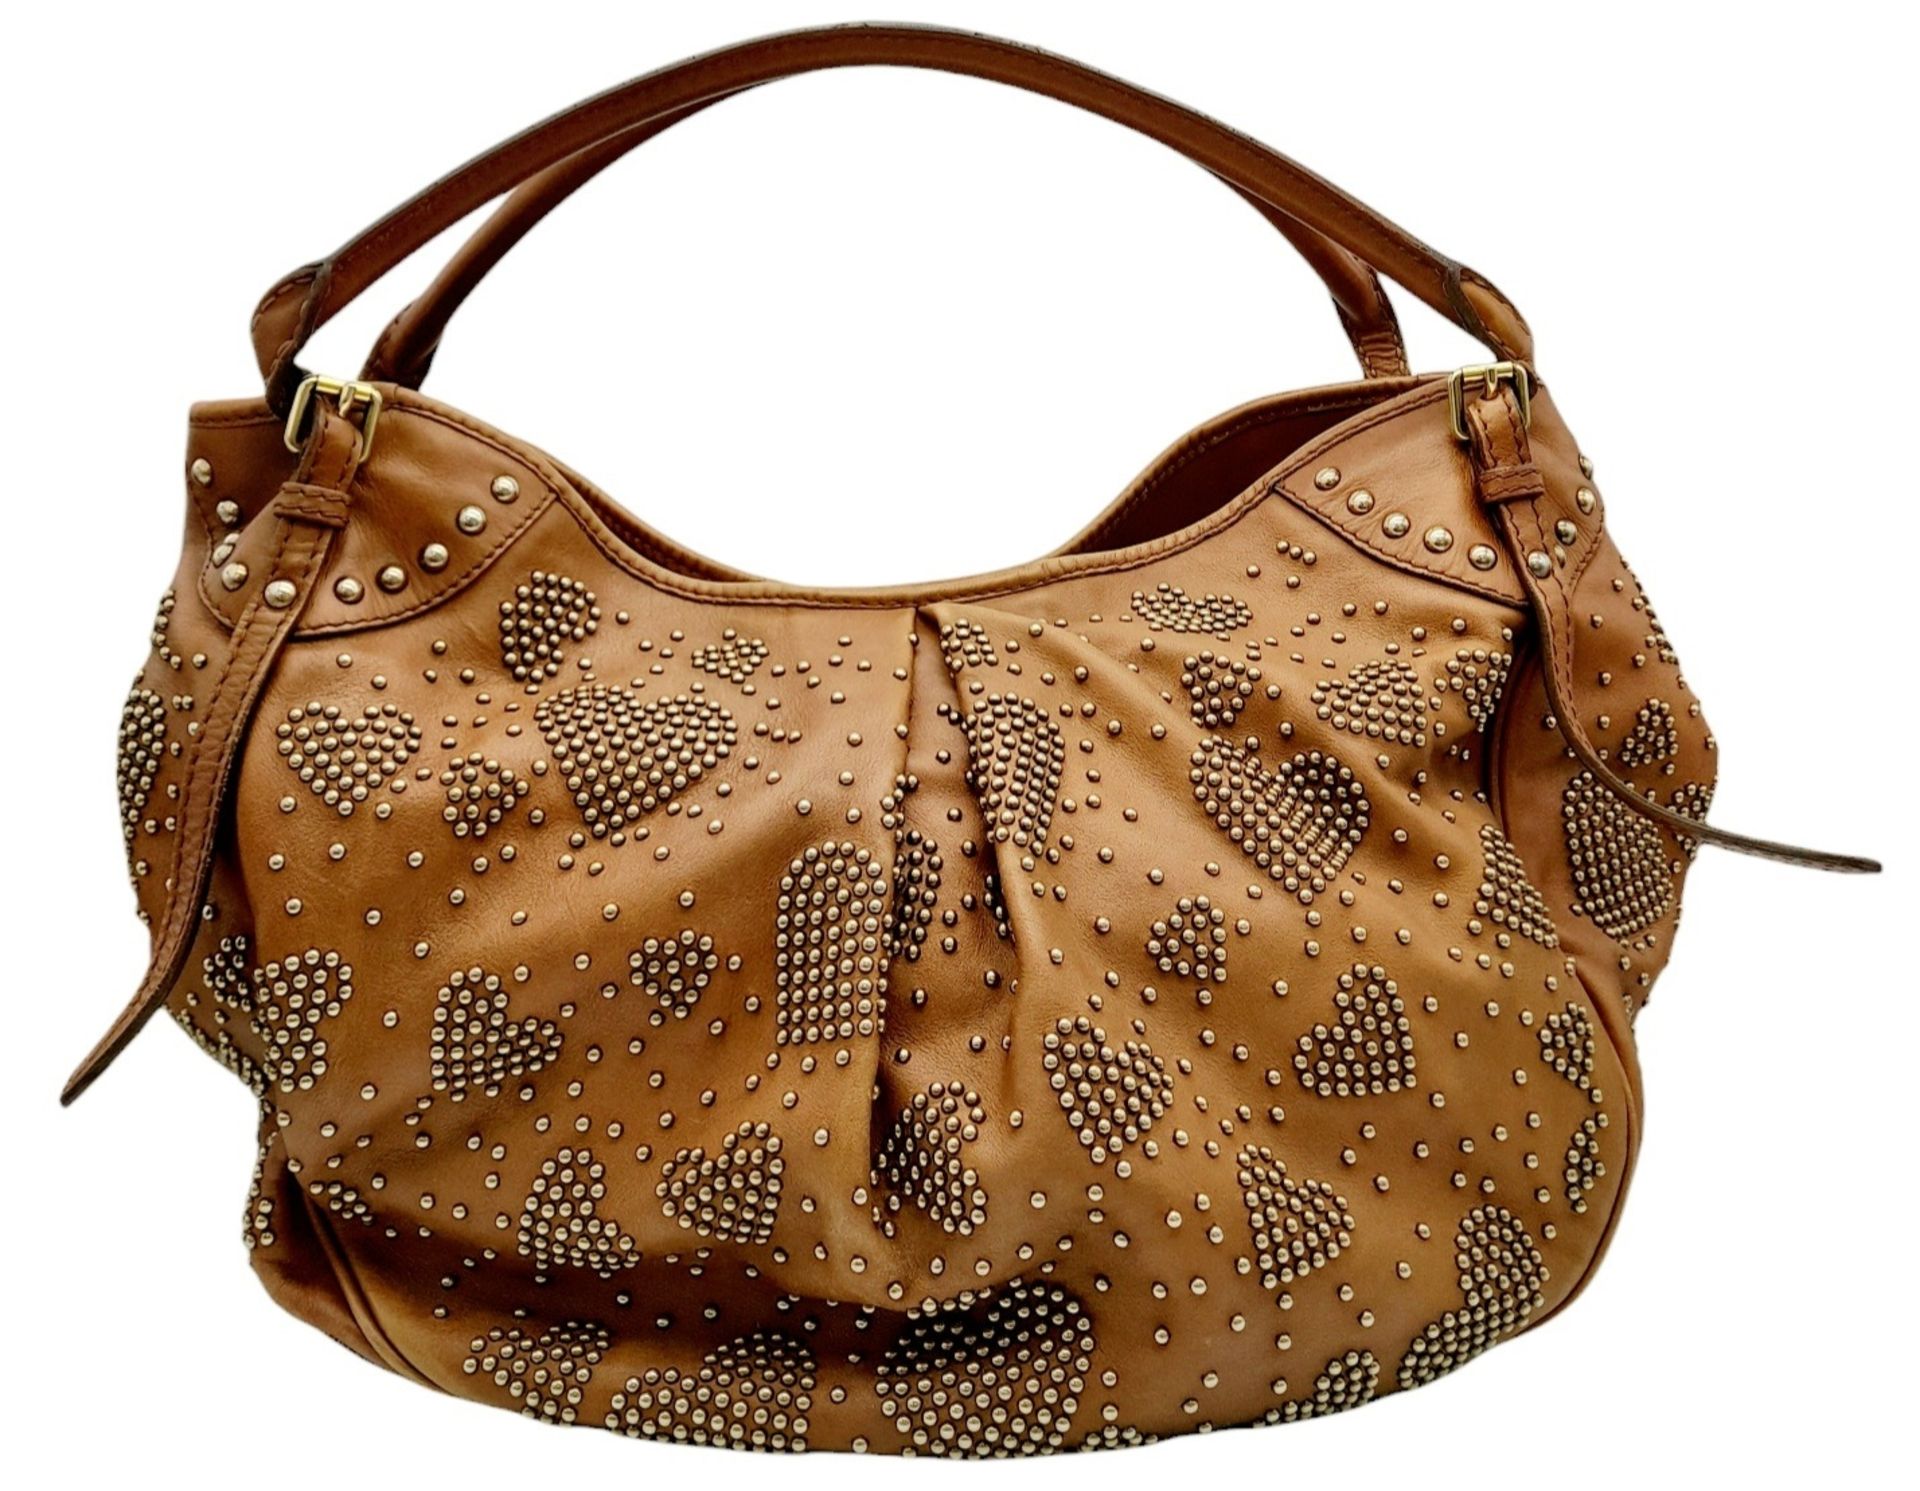 A Burberry Tan Studded Heart Hobo Bag. Leather exterior with stud embellishments, golden-toned - Bild 5 aus 8